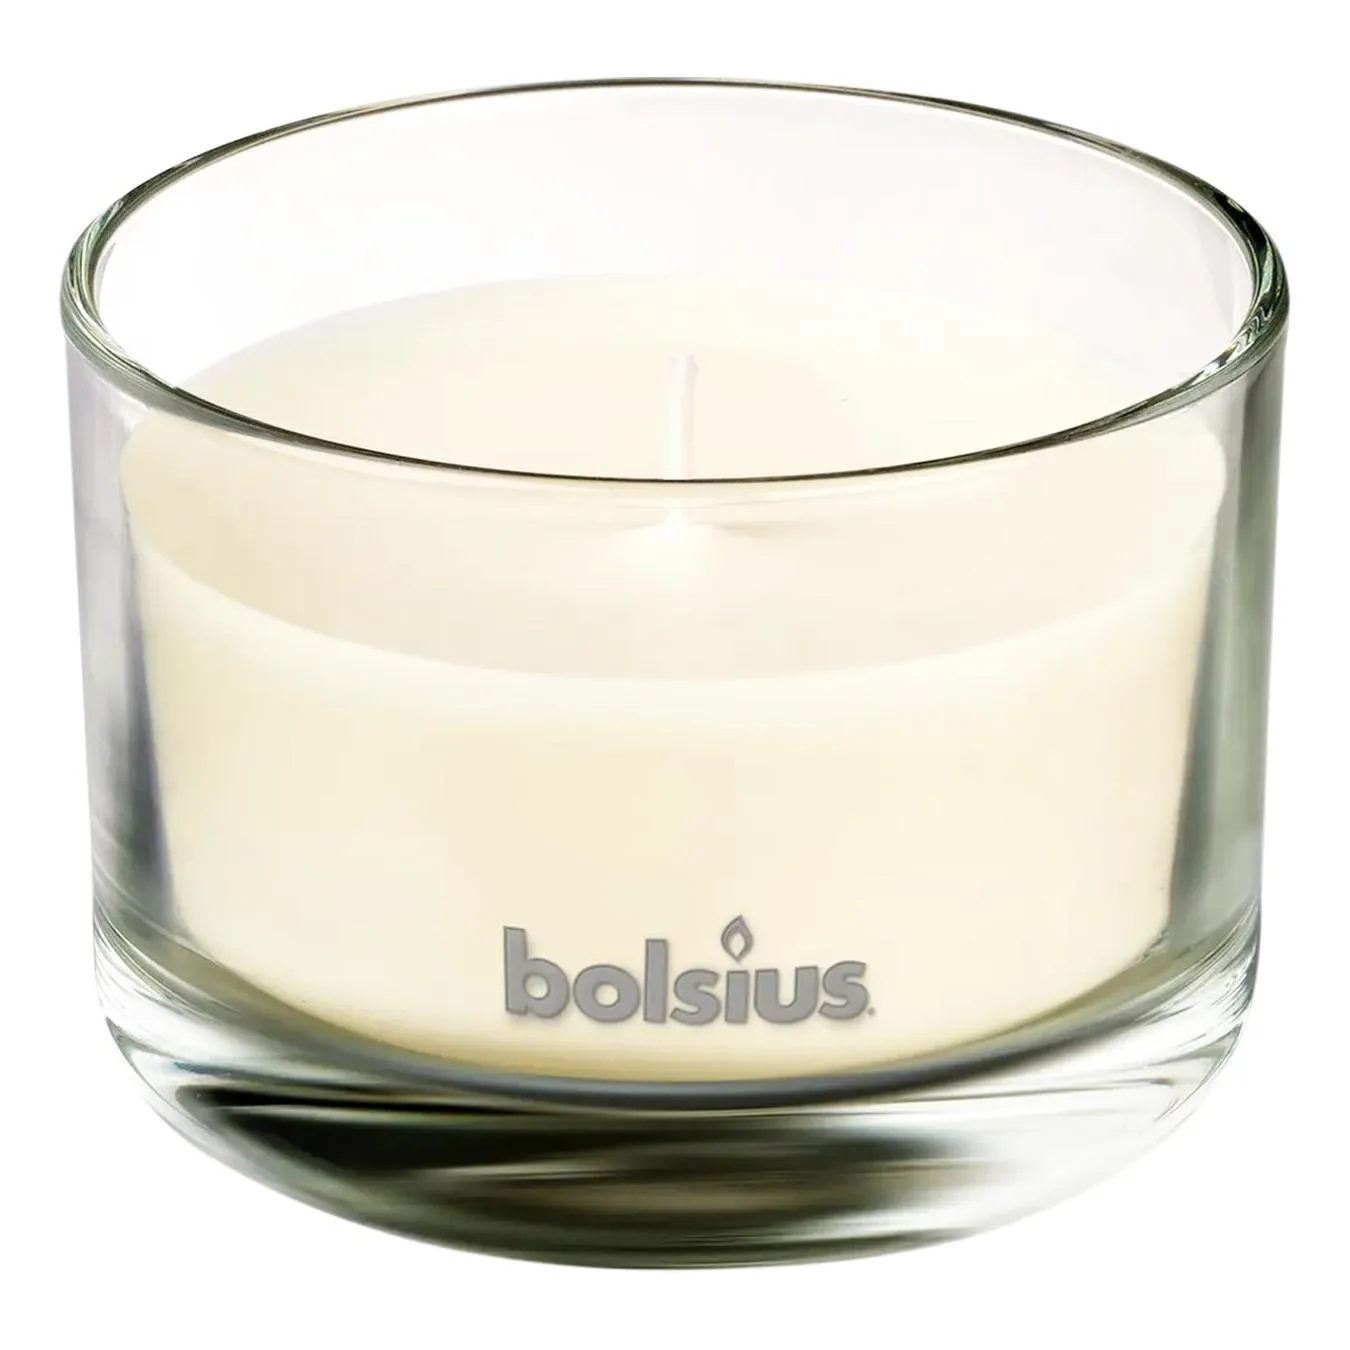 Bolsius glass candle with Vanilla aroma